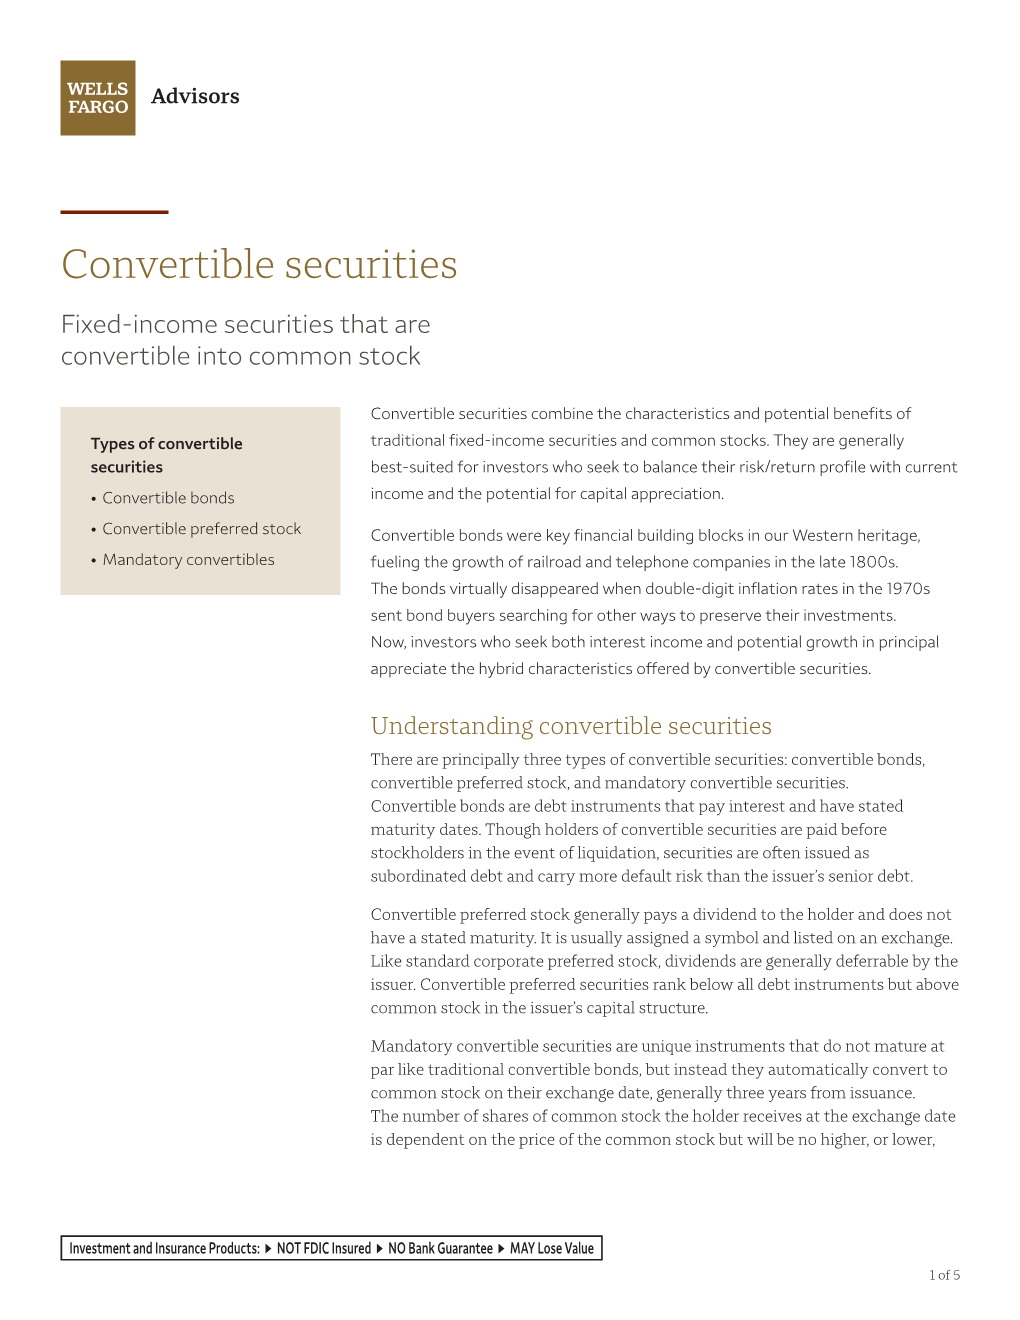 Convertible Securities Fixed-Income Securities That Are Convertible Into Common Stock